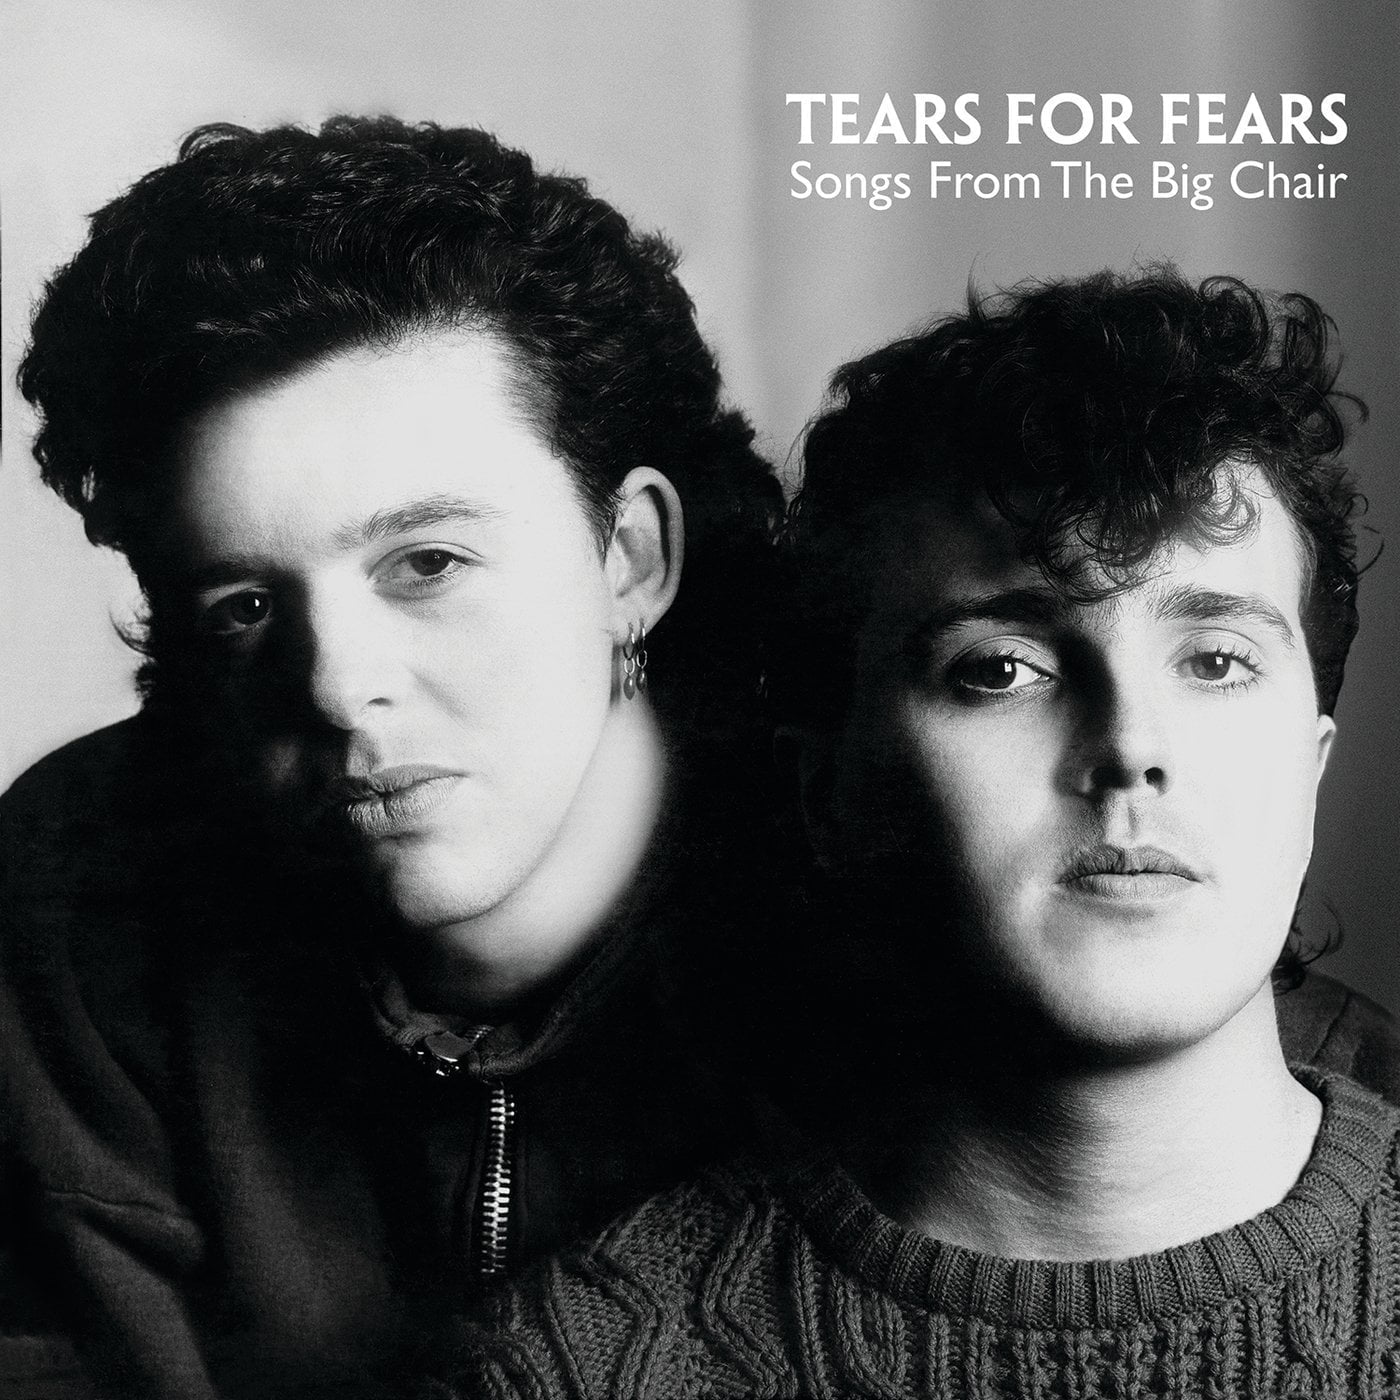 Best Tears For Fears Songs: 20 Cathartic Pop Classics